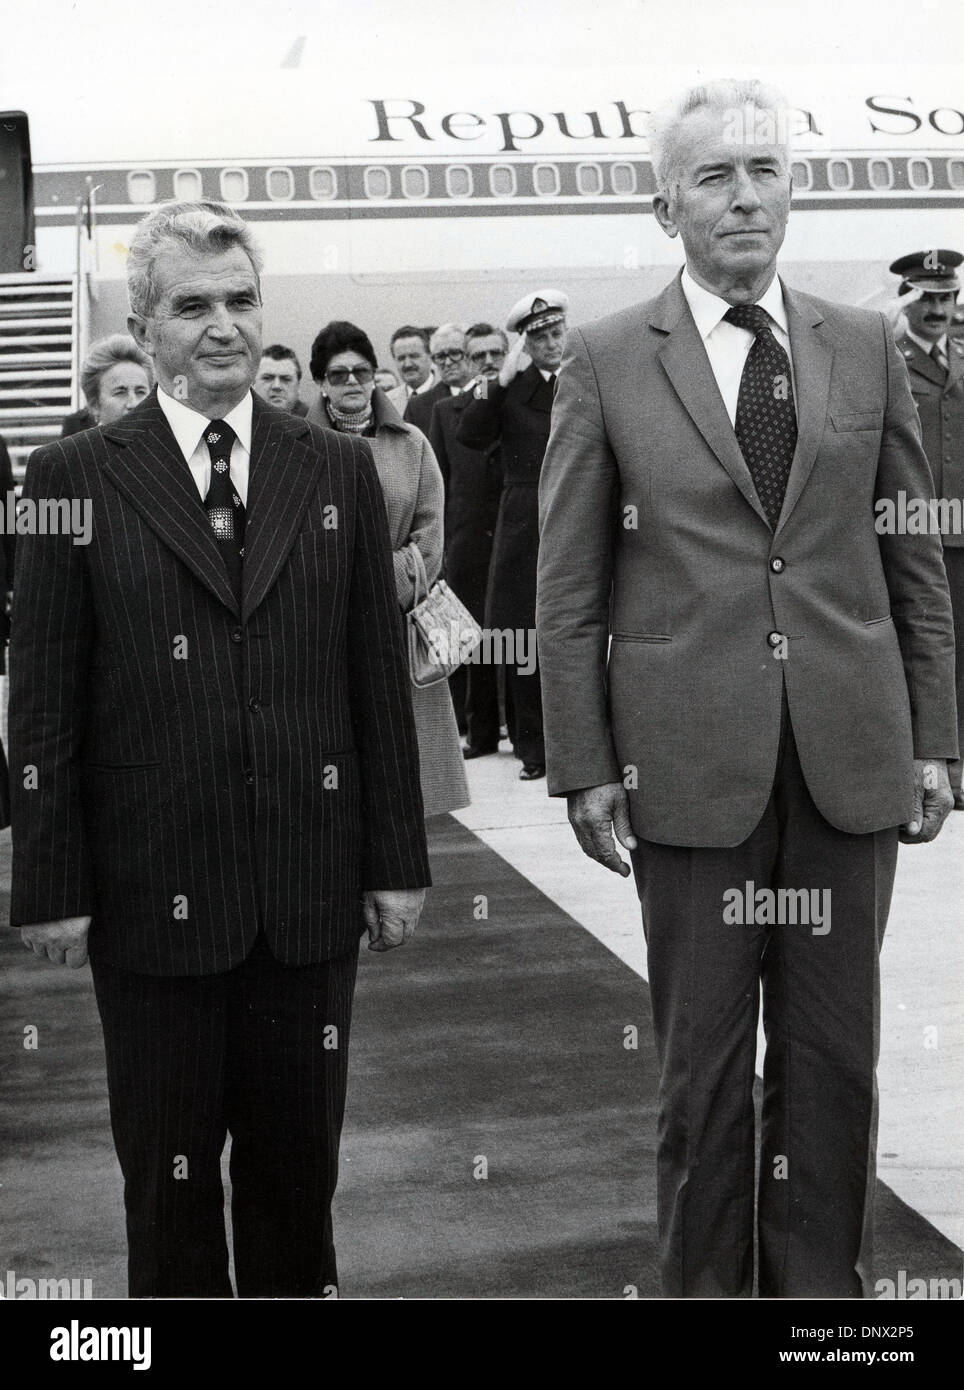 Nov 03, 1980 - Belgrade, Yugoslavia - Romanian Secretary General NIKOLAE CEAUSESCU (L) is greeted at the Belgrade Airport by President of the Socialist Federal Republic of Yugoslavia CVIJETIN MIJATOVIC. Ceausescu is on an official and friendly visit to Yugoslavia. (Credit Image: © KEYSTONE Pictures/ZUMAPRESS.com) Stock Photo